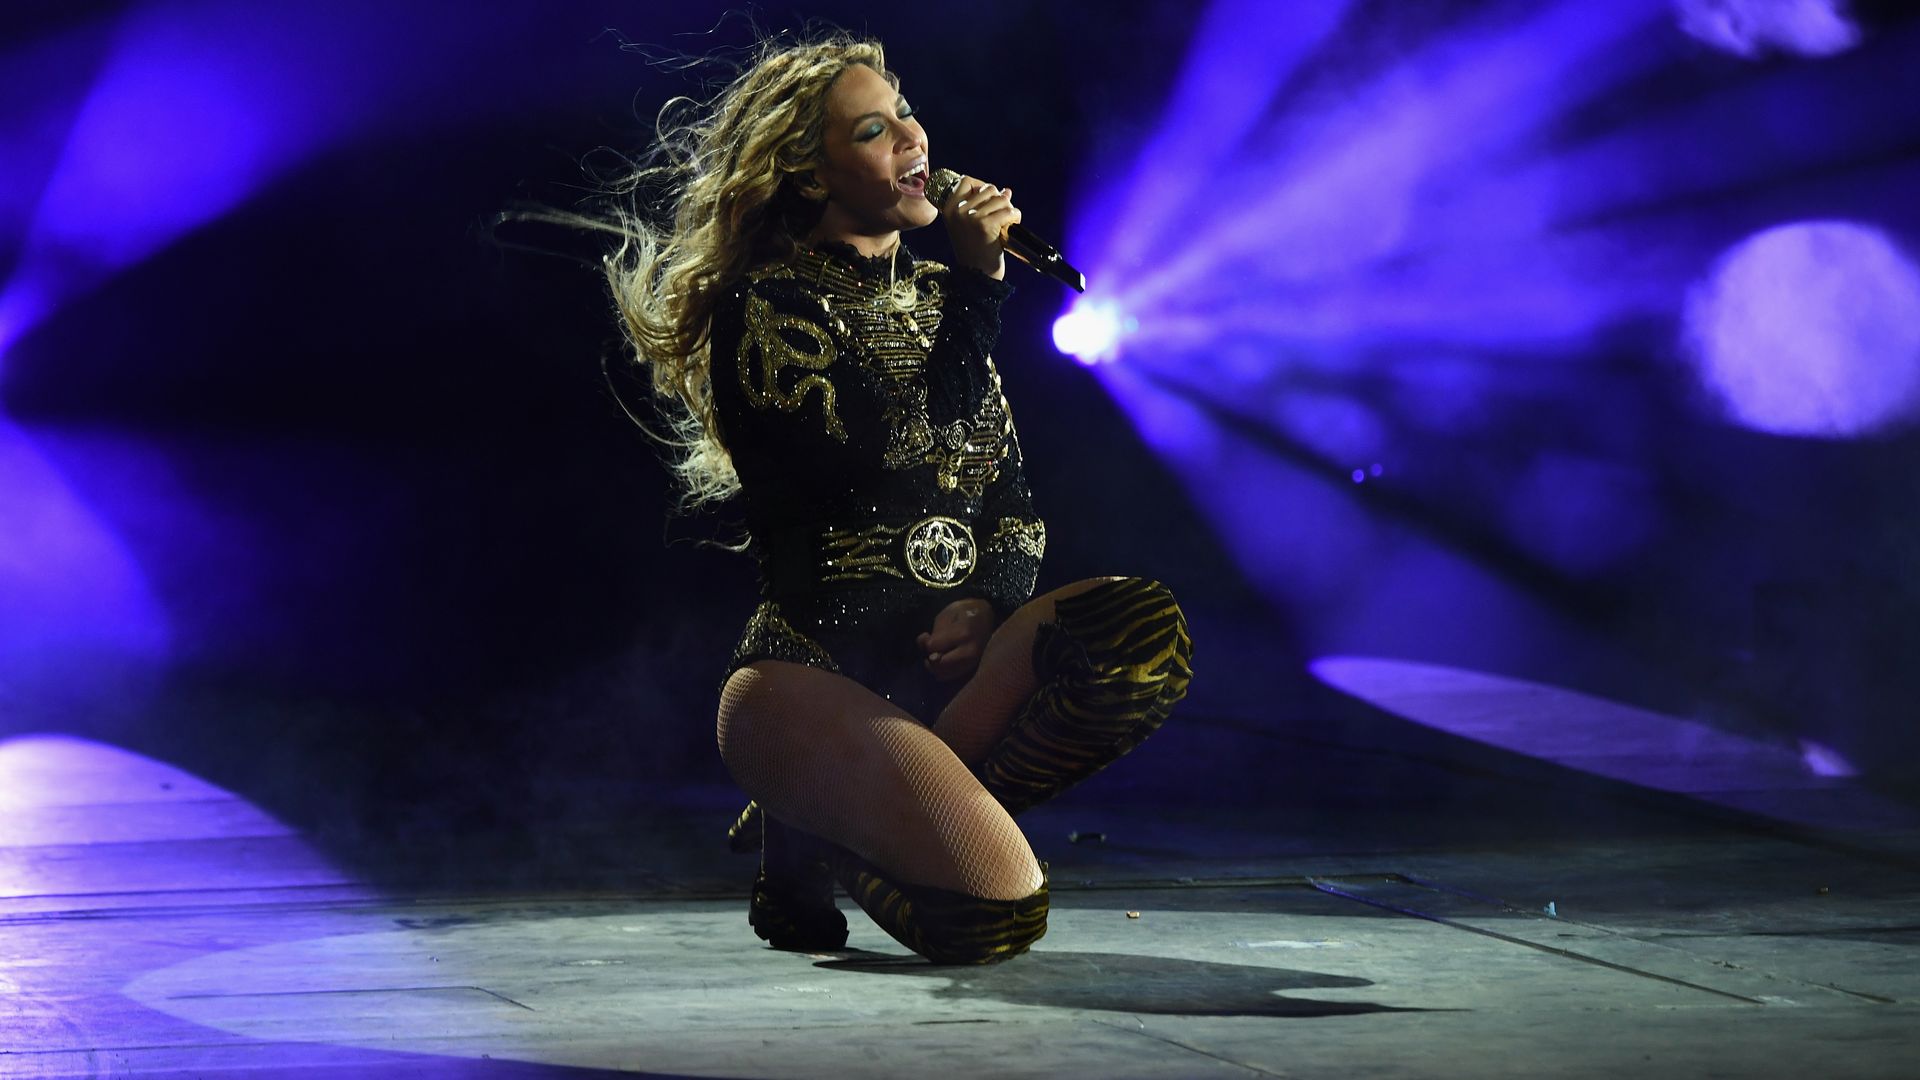 The performer Beyonce kneels on stage while singing into a microphone. She is wearing a black, sparkly bodysuit and is illuminated by purple lights.